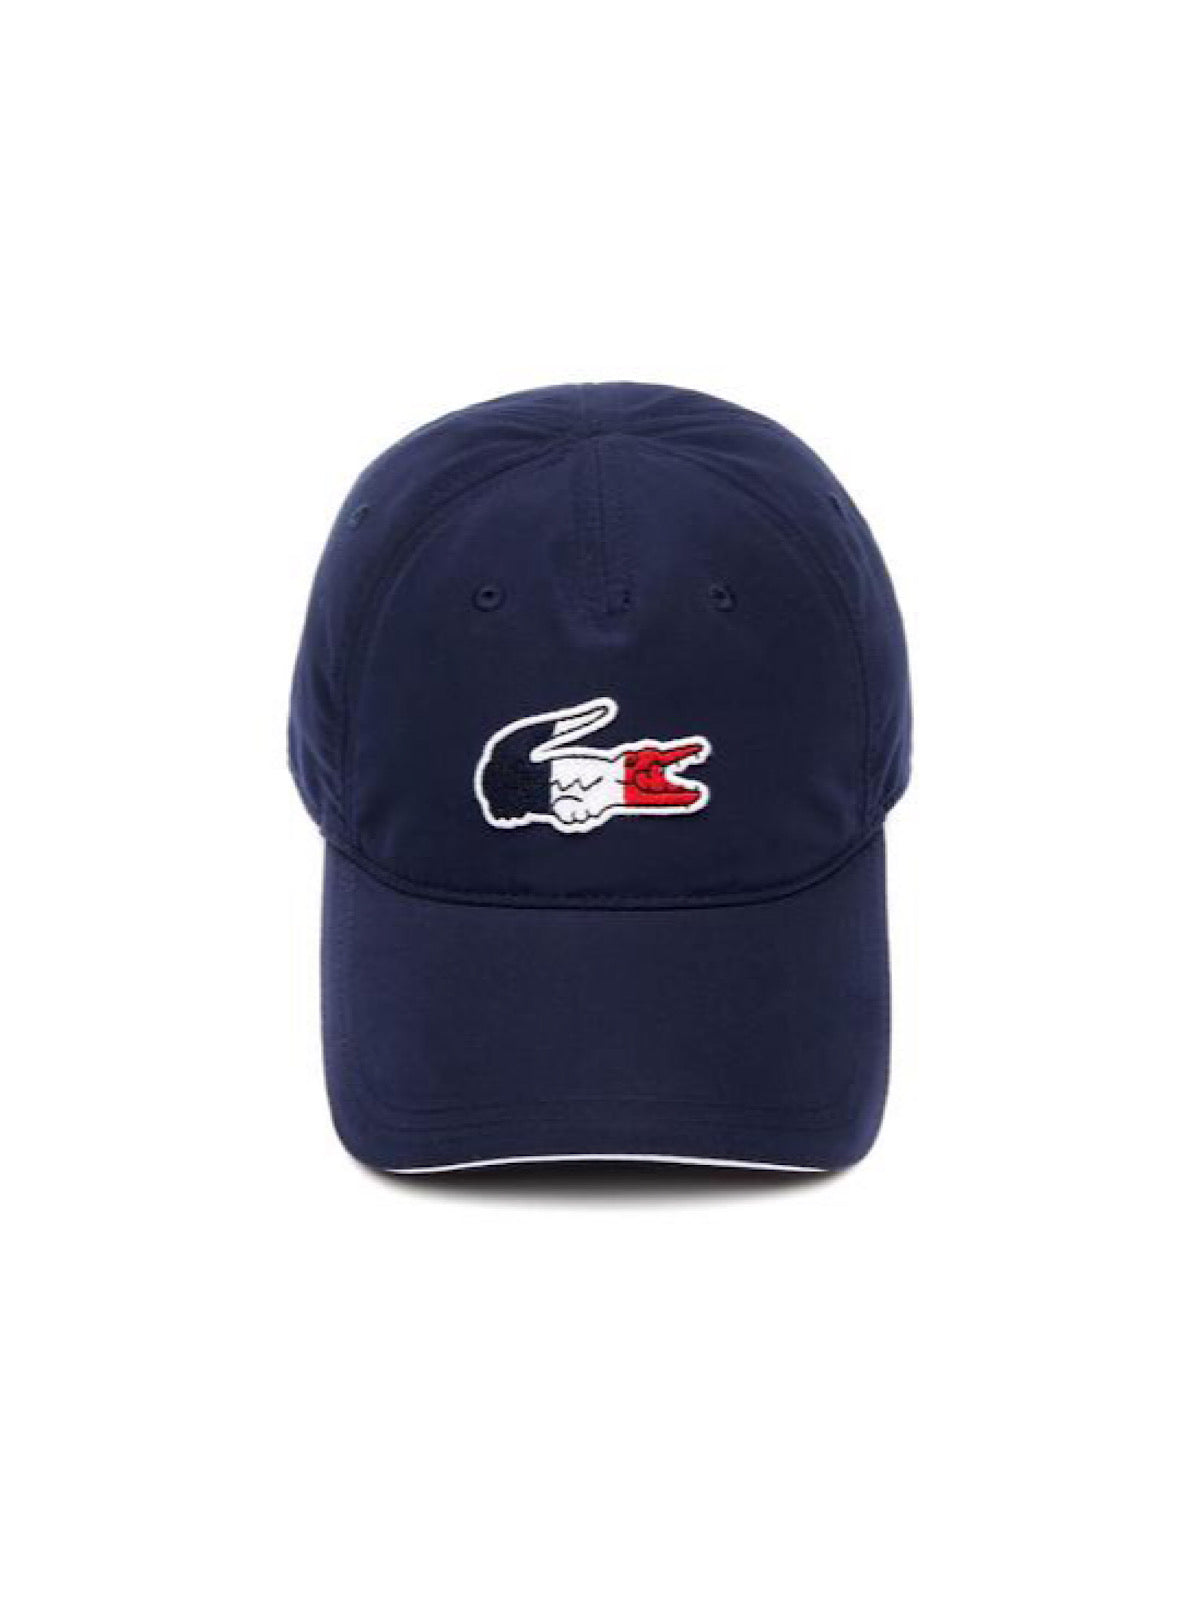 Lacoste Hat - USA Colors - Navy 